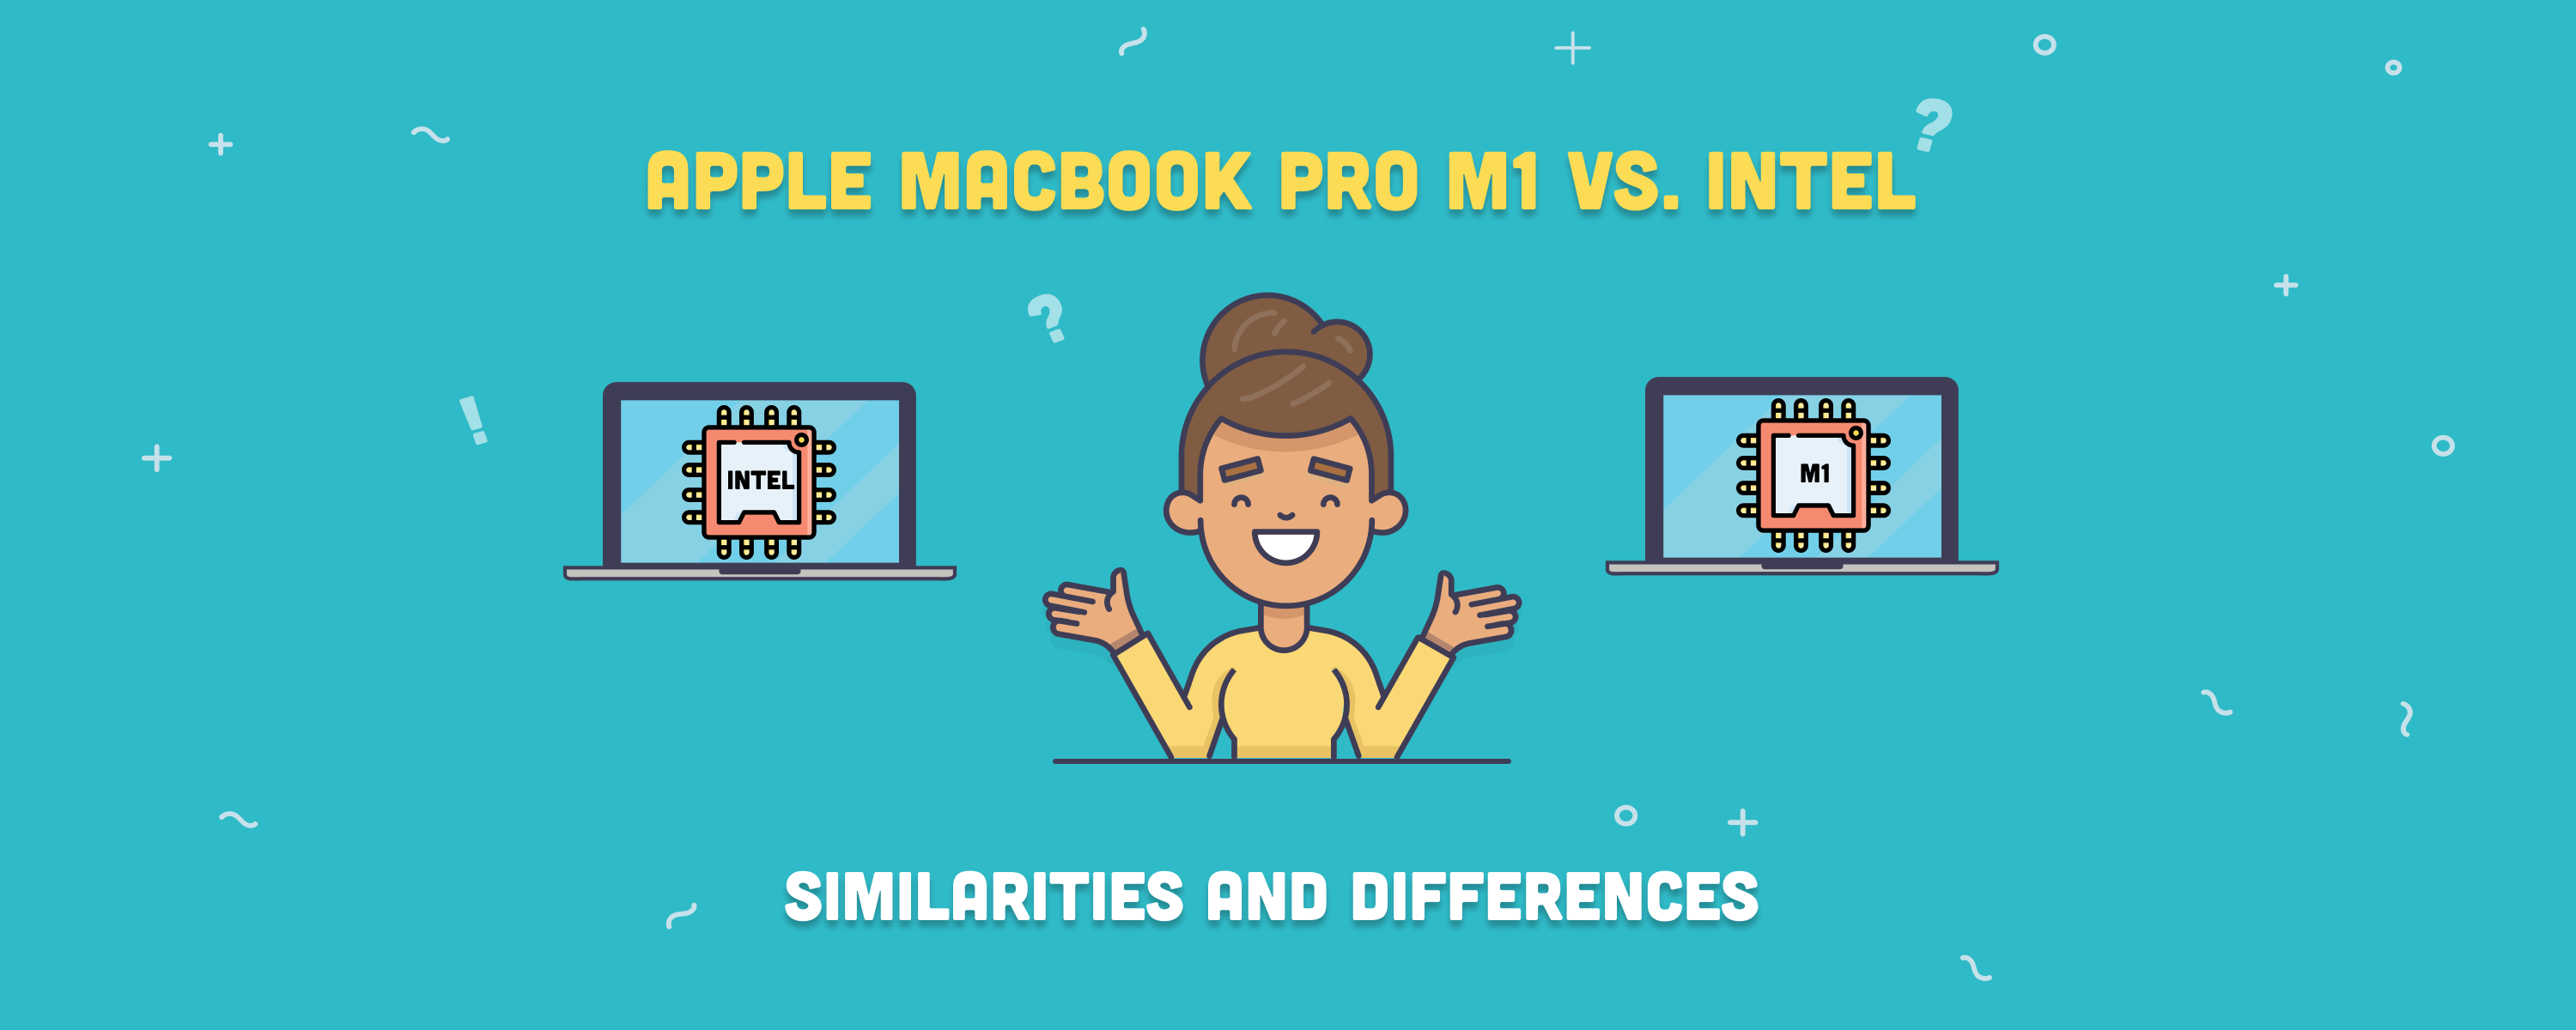 Apple M1 vs. Intel MacBook Pro: Similarities and Differences